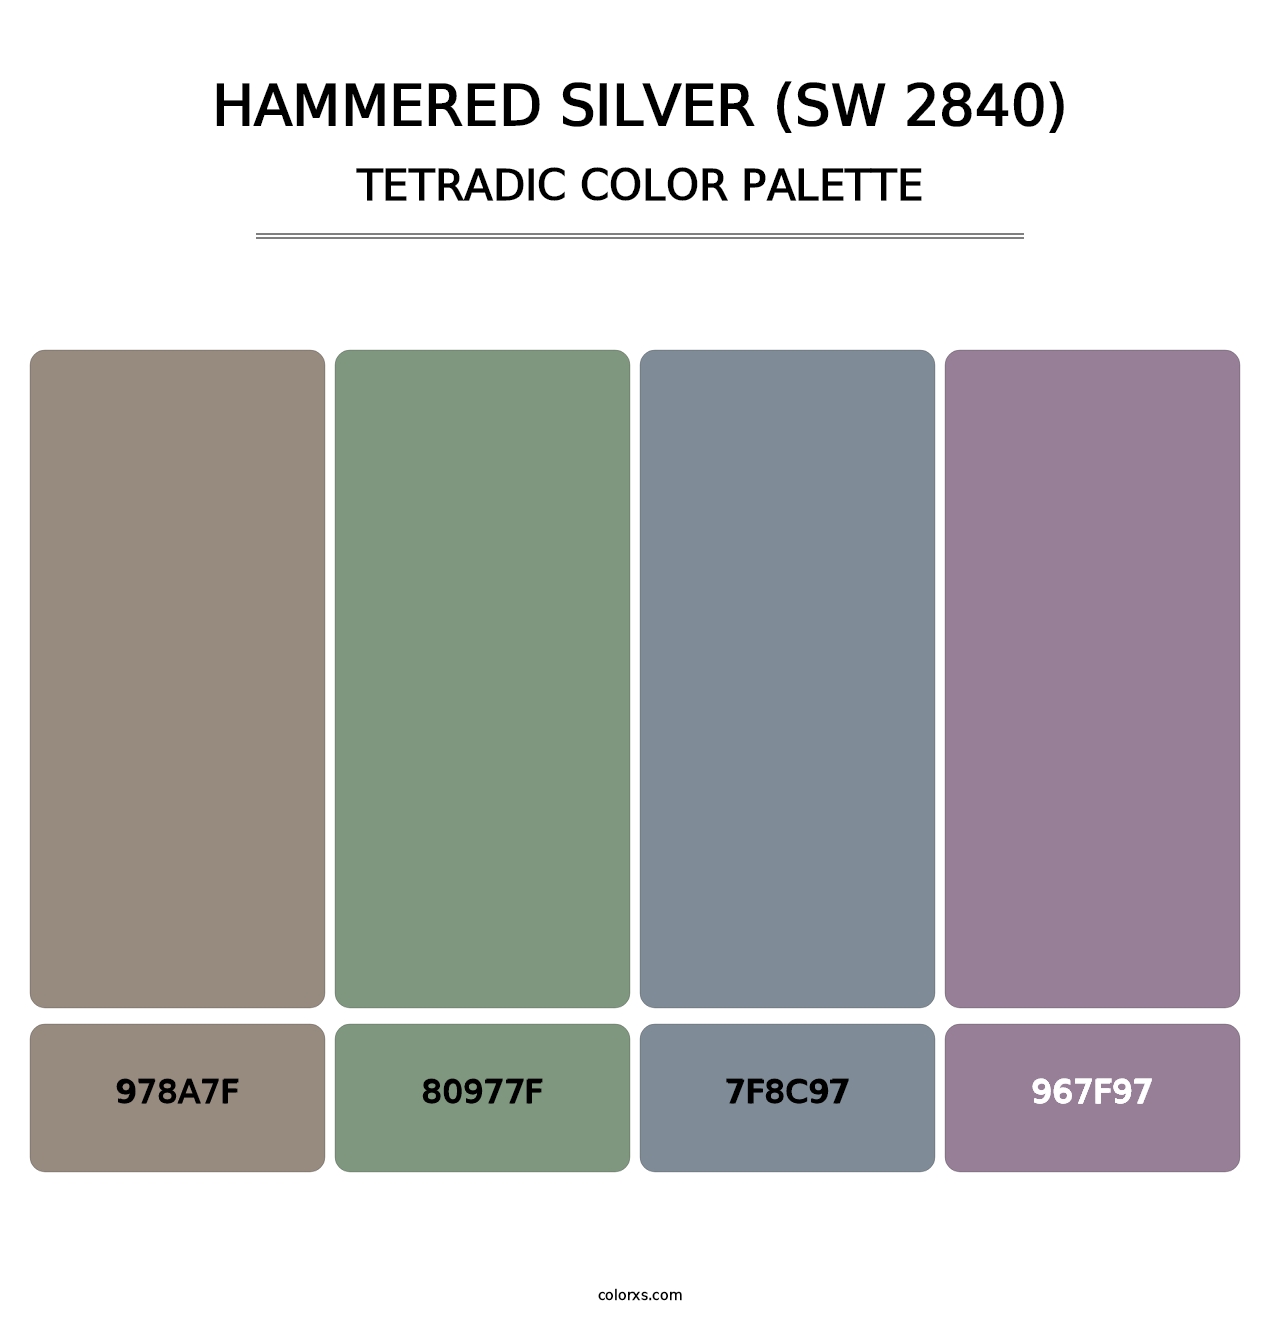 Hammered Silver (SW 2840) - Tetradic Color Palette